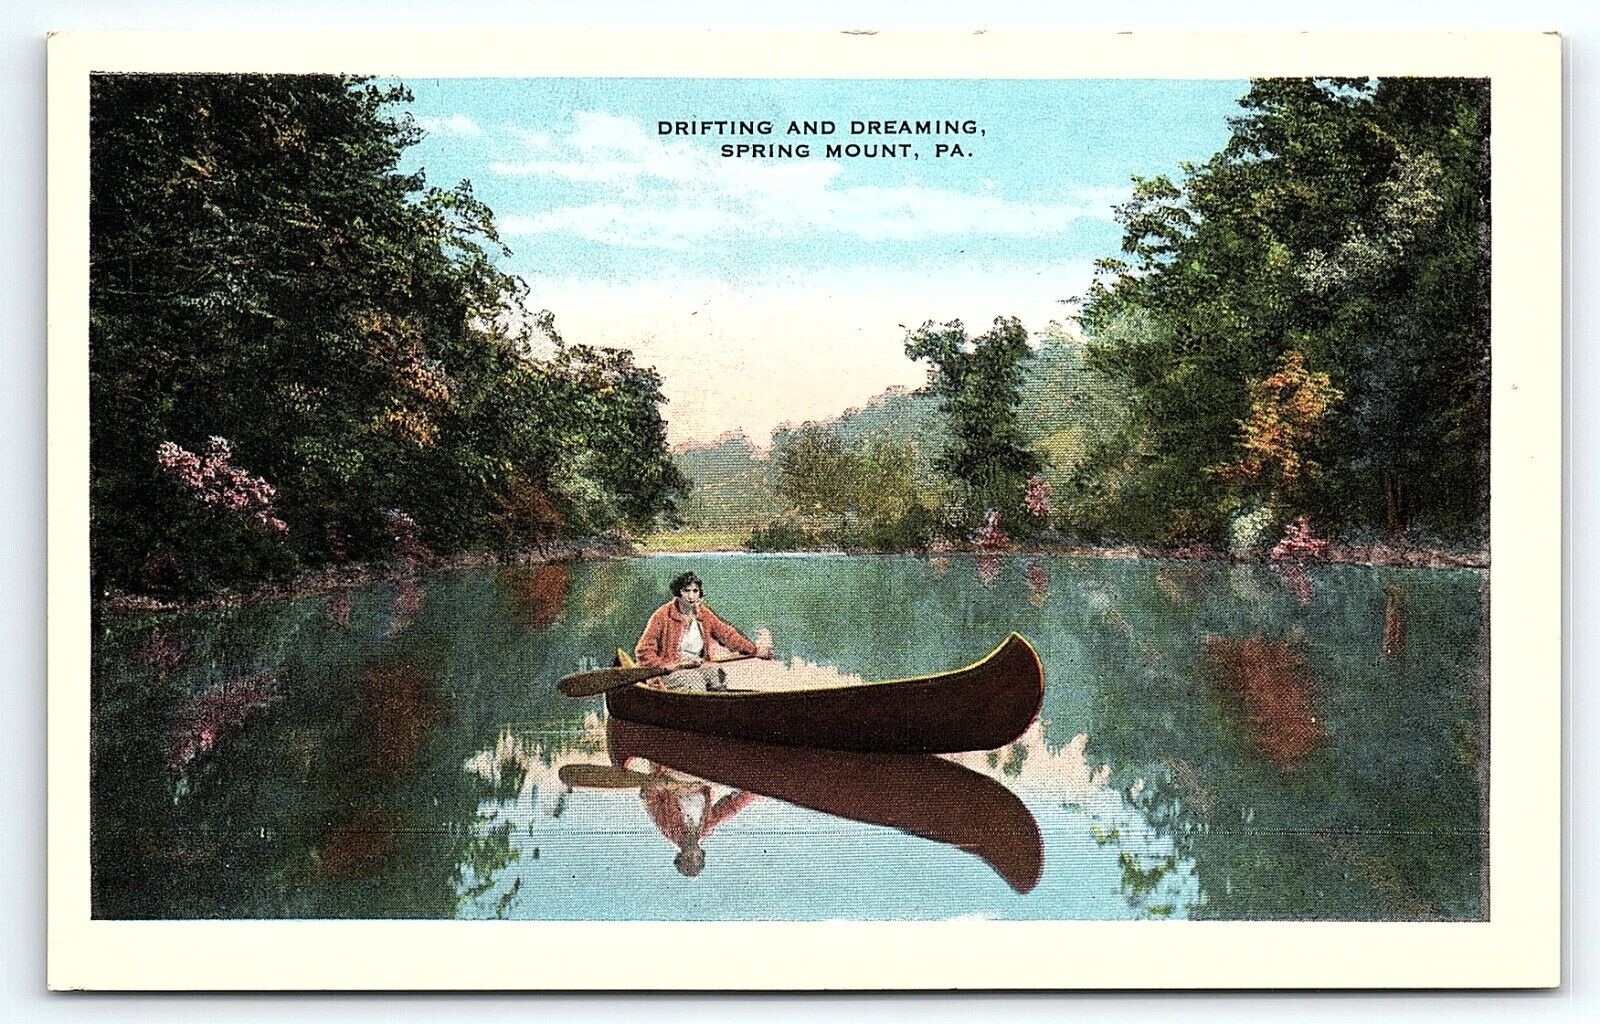 c1920 SPRING MOUNT PA LADY IN CANOE DRIFTING DREAMING W R KINDIG POSTCARD P4561